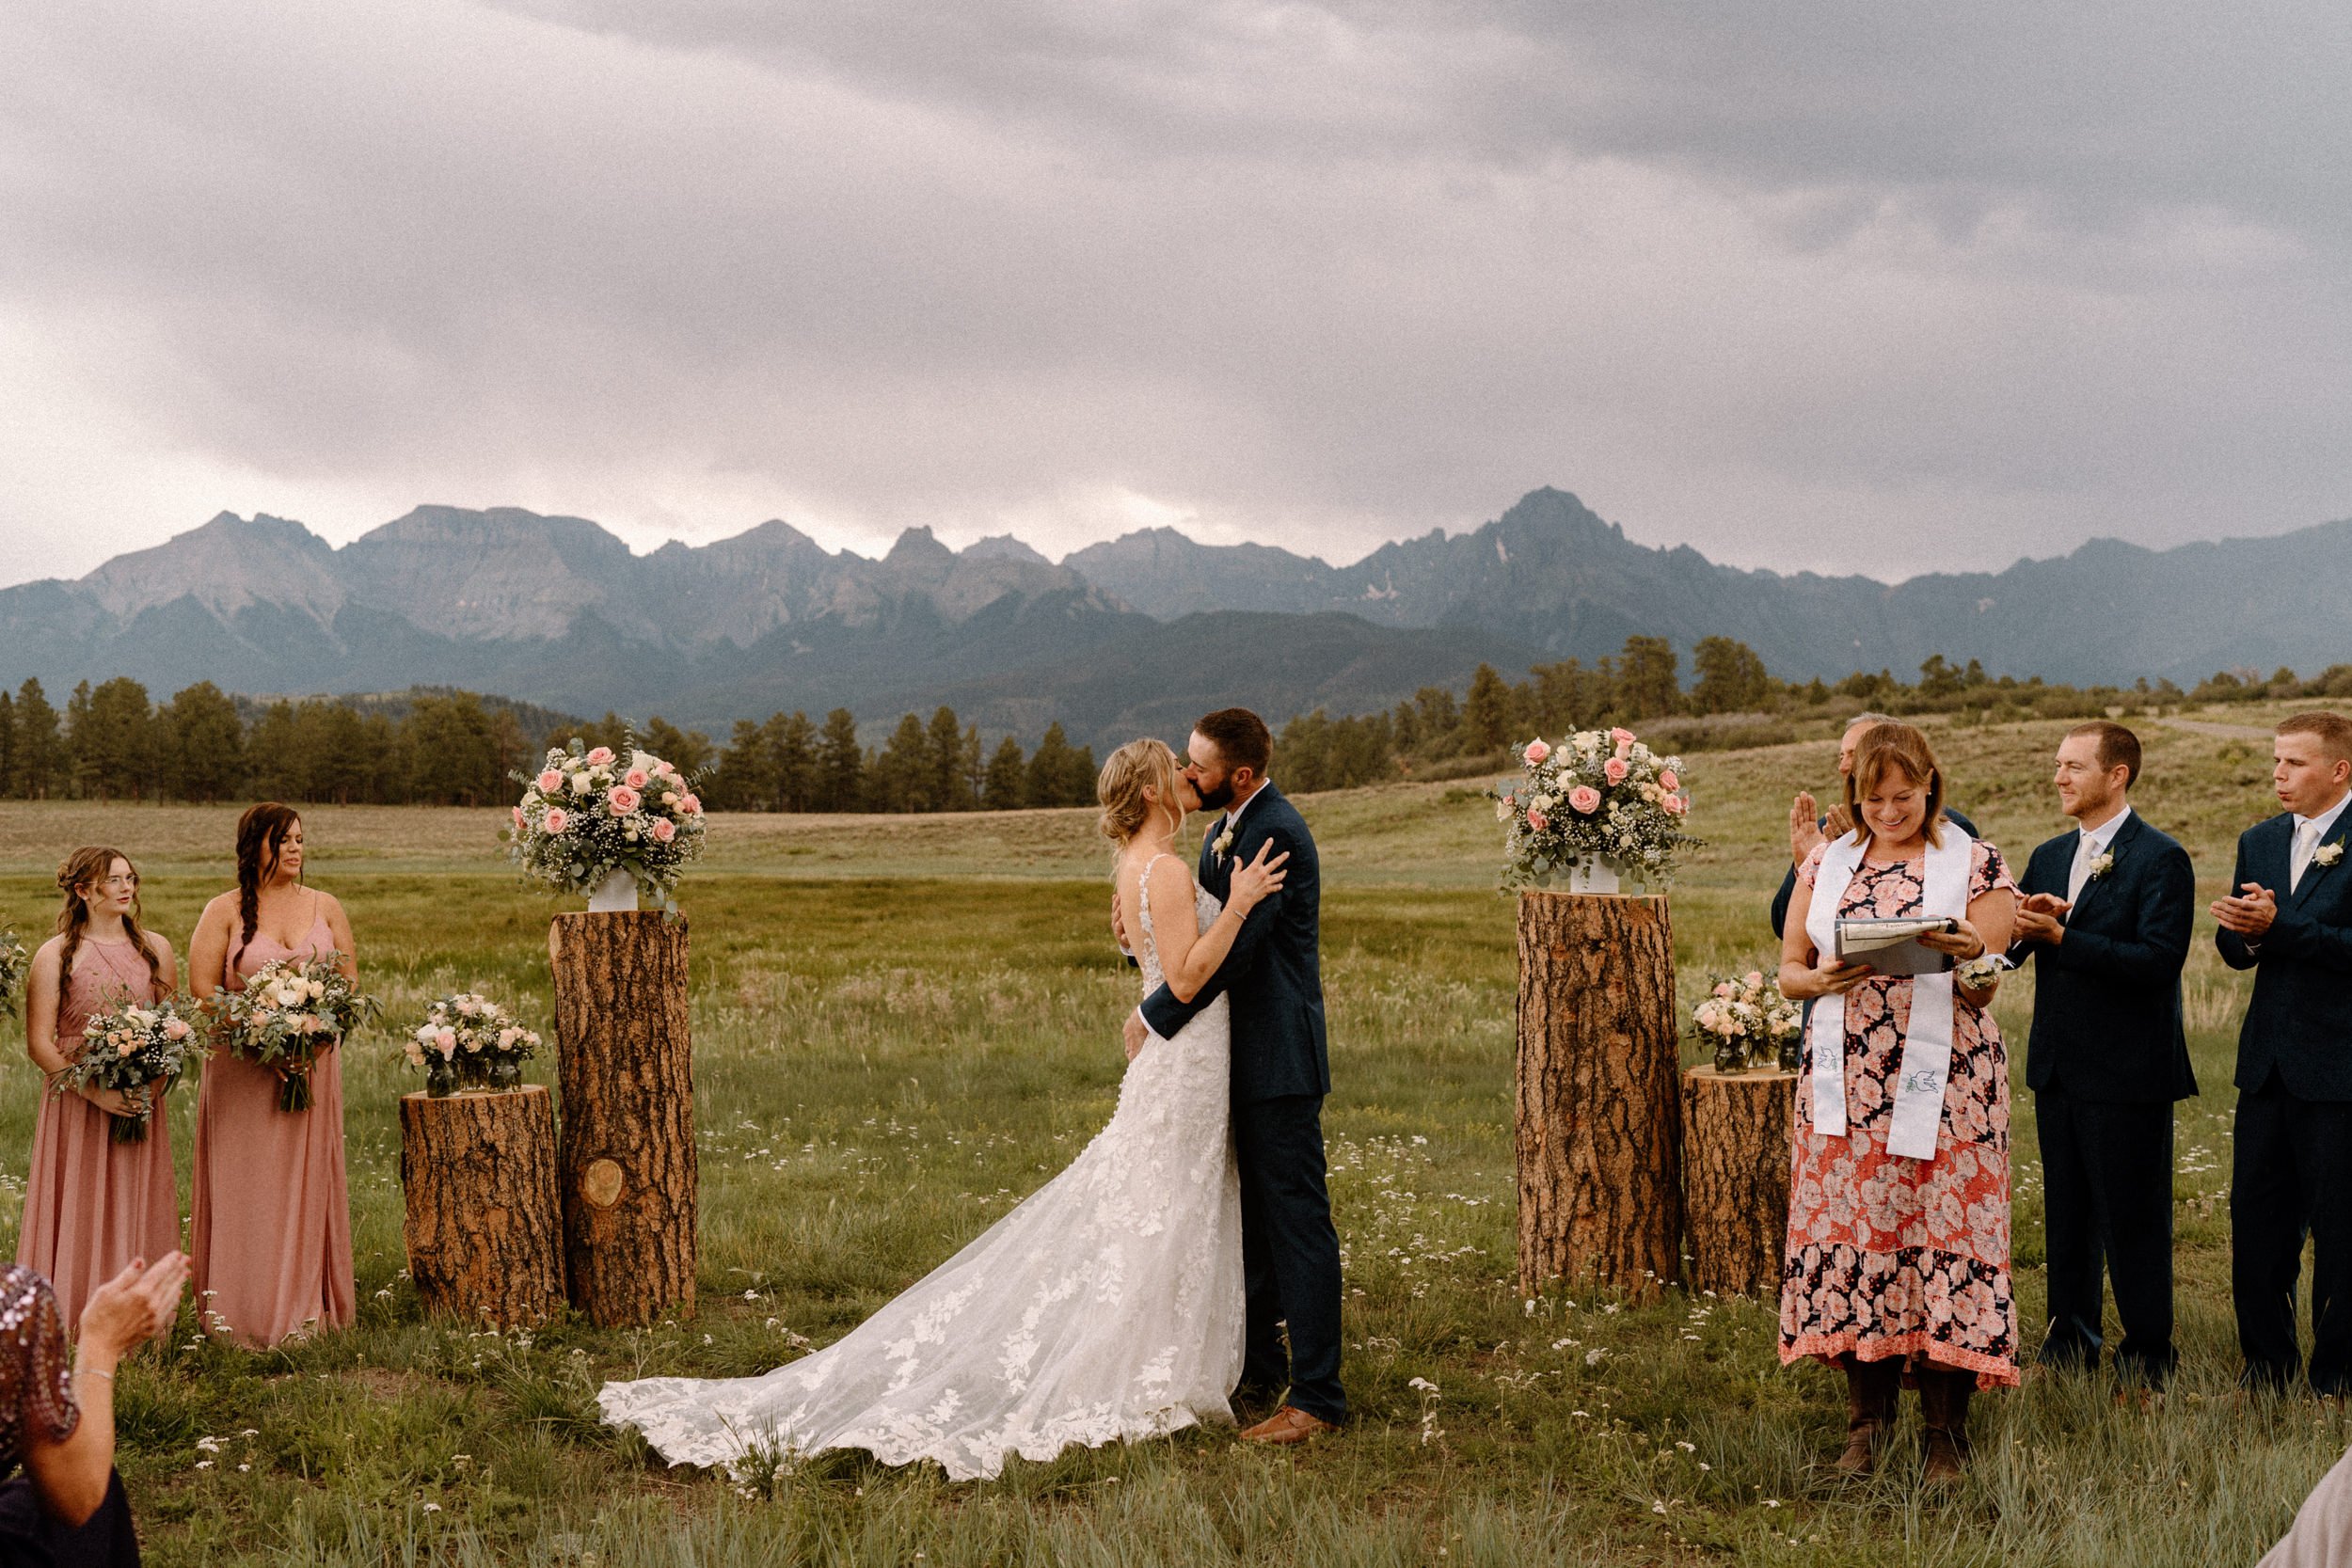 Bride and groom share their first kiss at Top of the Pines in Ridgway, CO